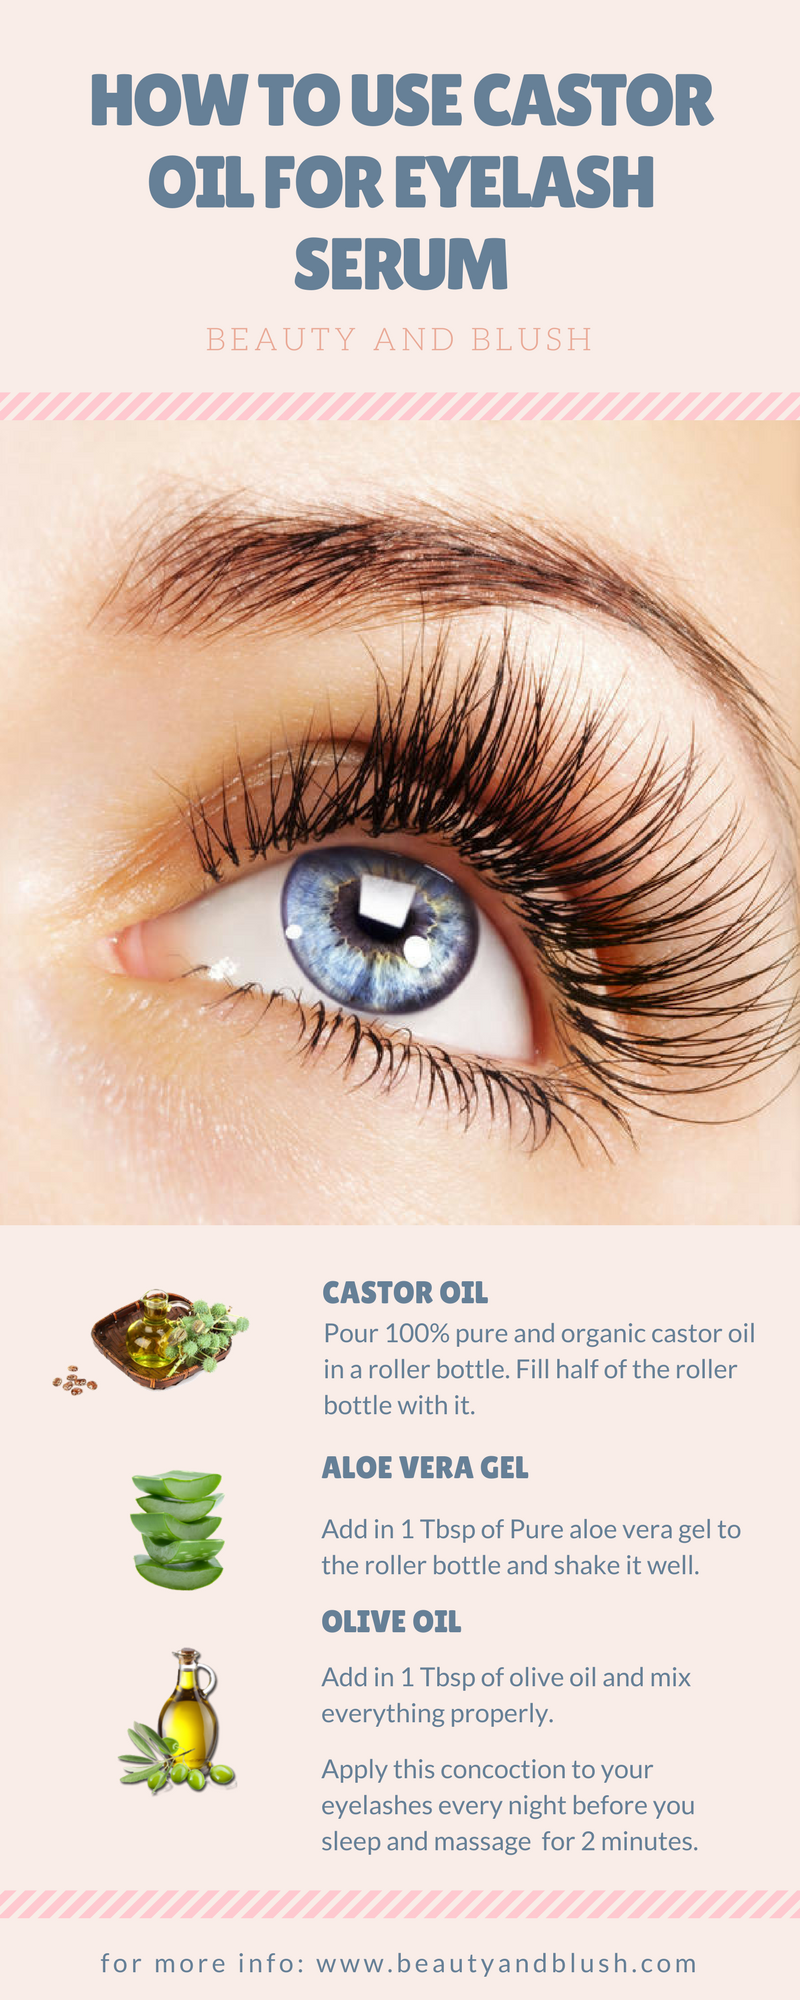 How to Use Castor Oil for Eyelash Serum - Beauty and Blush